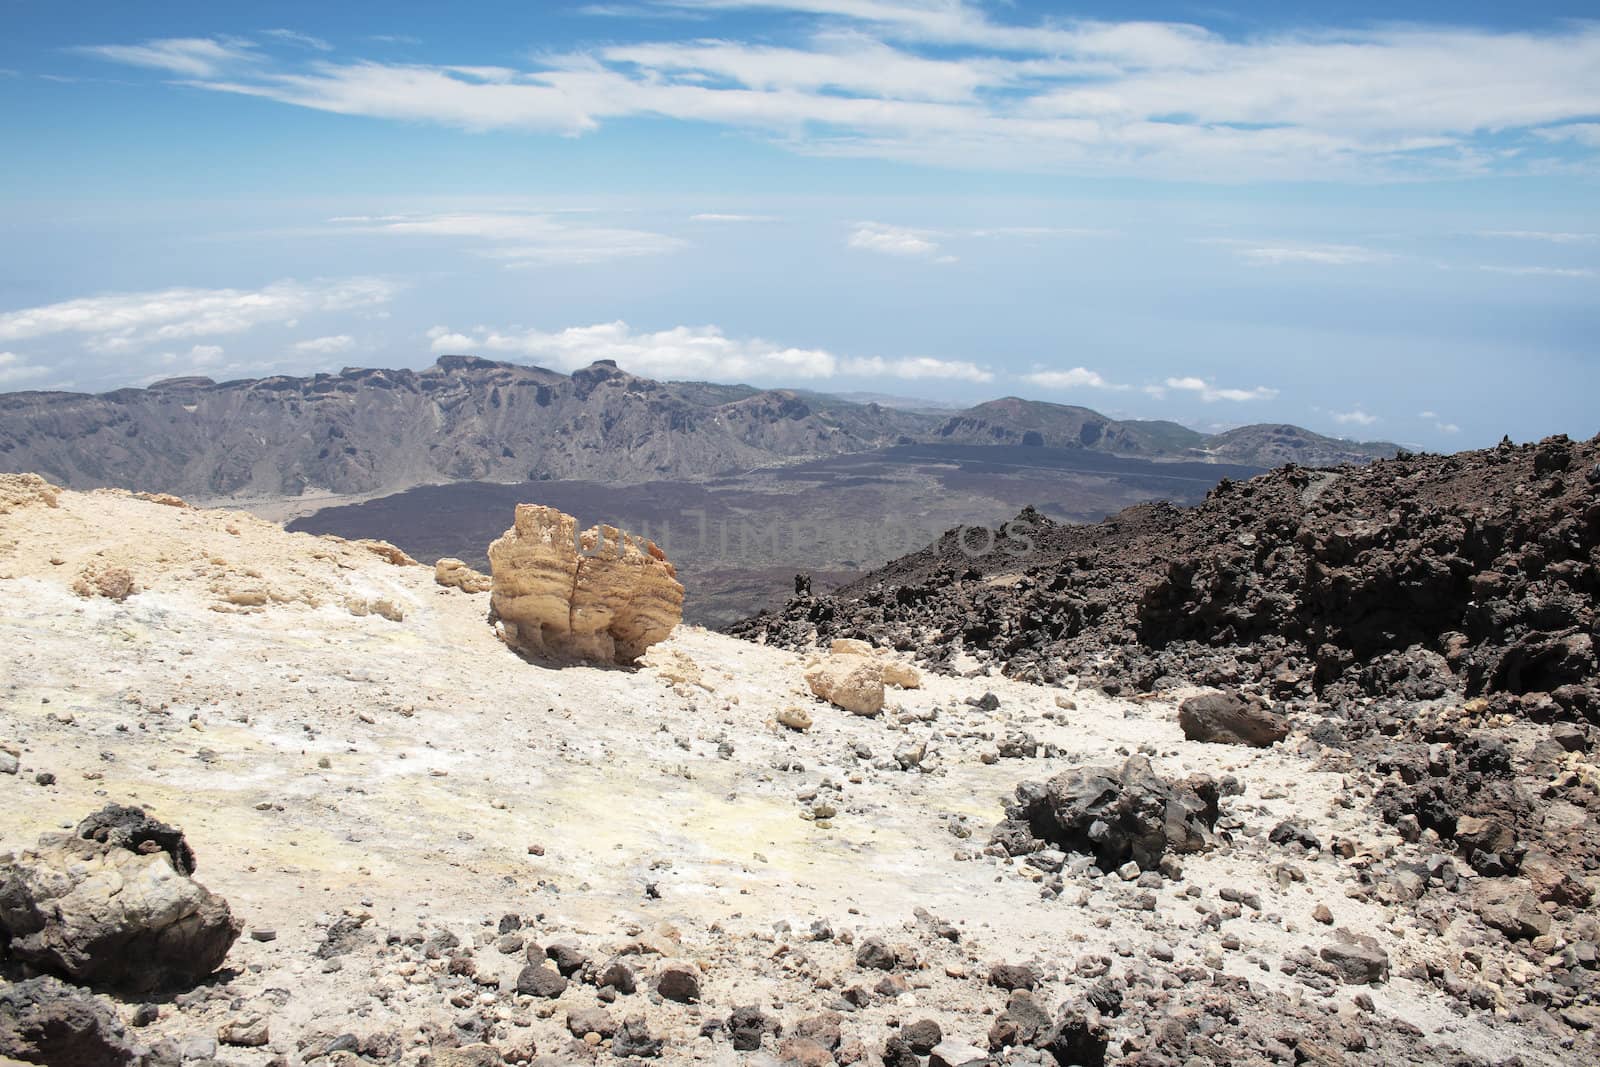 view of Martian landscape from the volcano of Mount Teide on Tenerife Spain